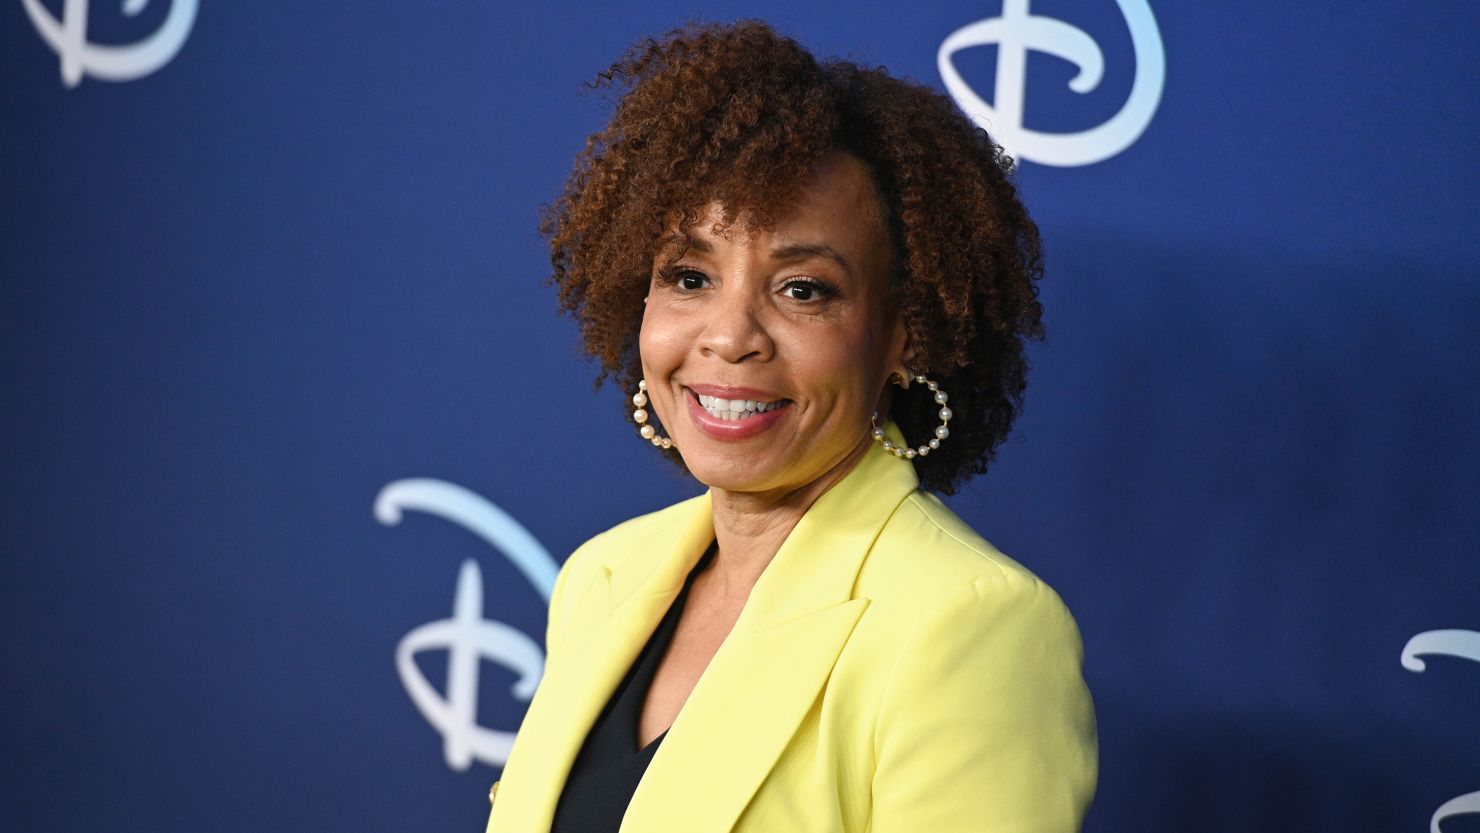 President of ABC News, Kim Godwin at the 2022 ABC Disney Upfront at Basketball City - Pier 36 - South Street on May 17, 2022 in New York City. ABC News staffers are reportedly frustrated with her ongoing tenure.